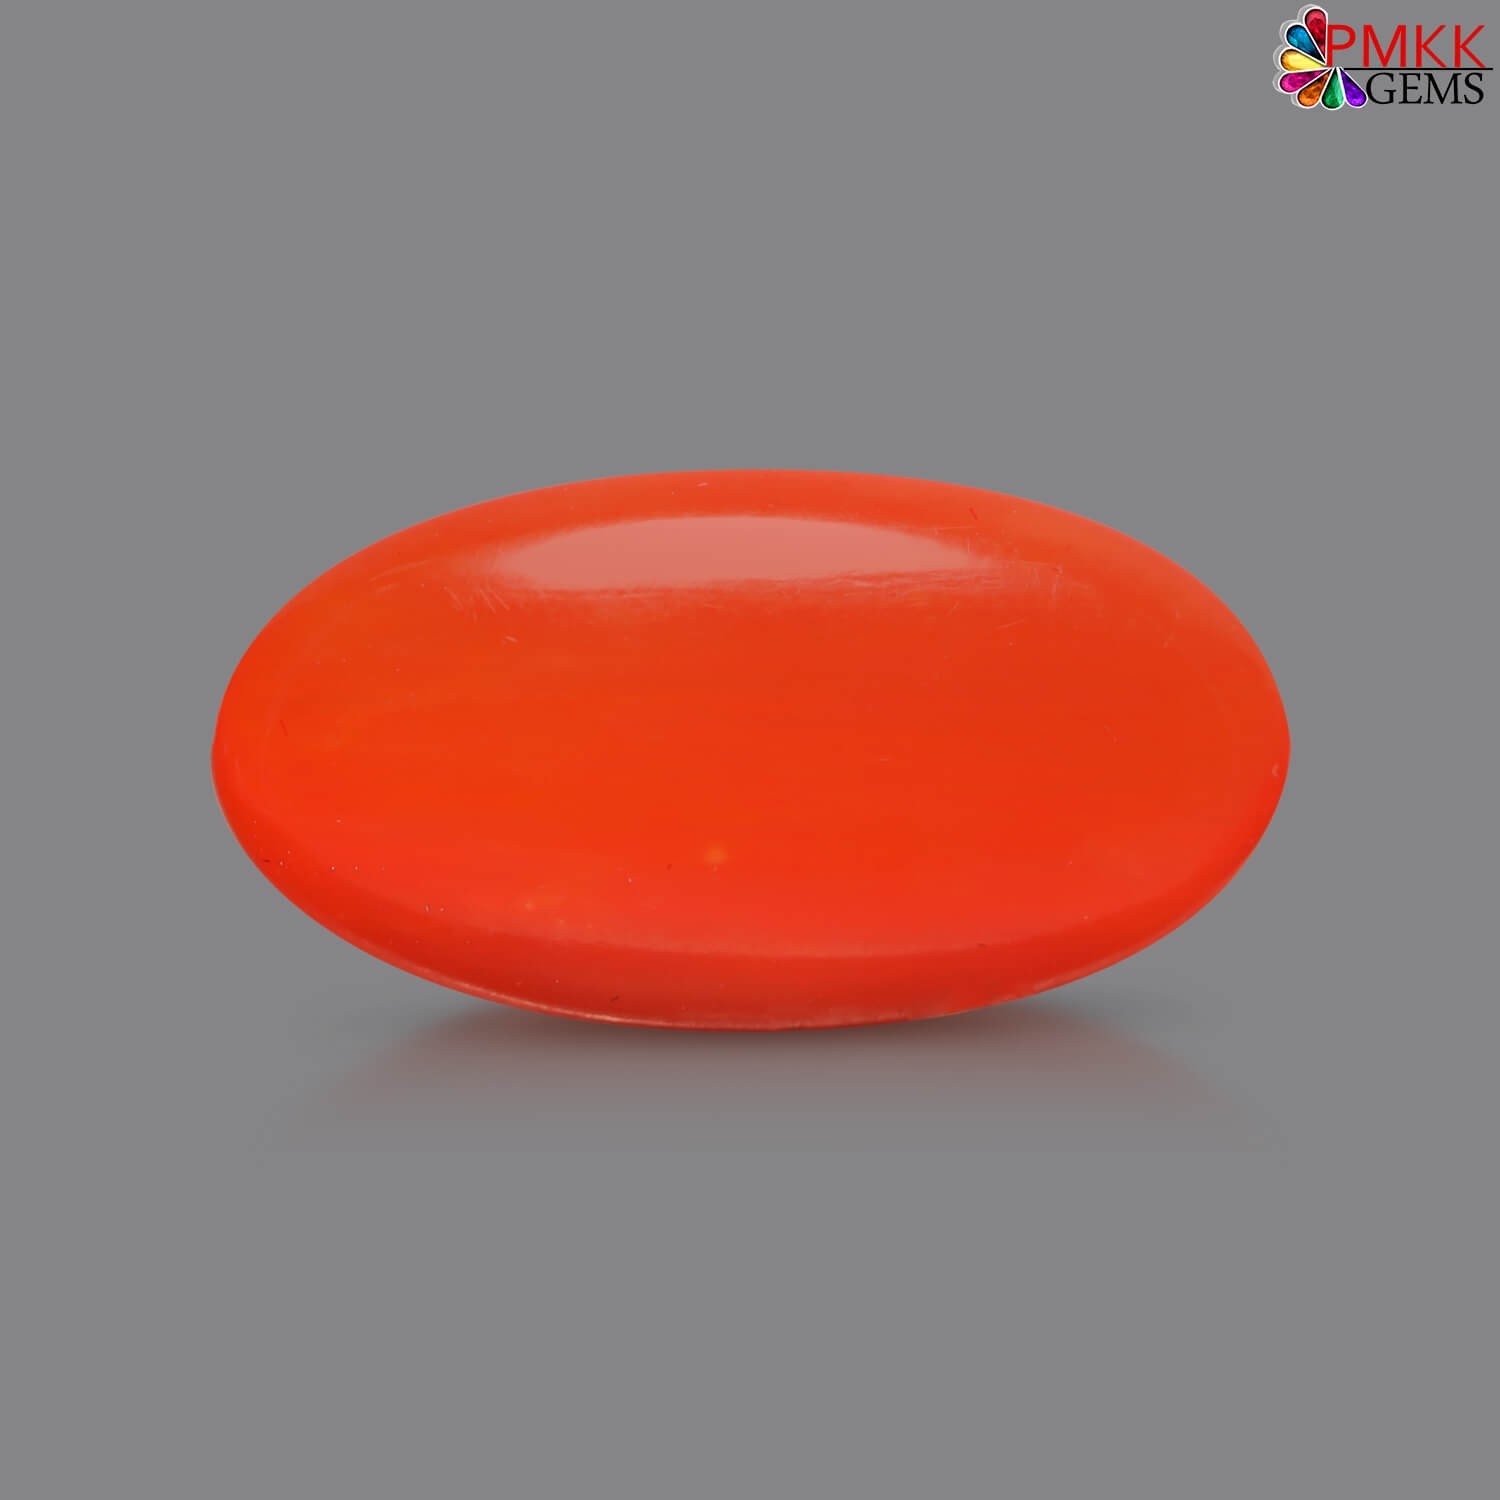 Japanese Red Coral Stone 4.48 Carat